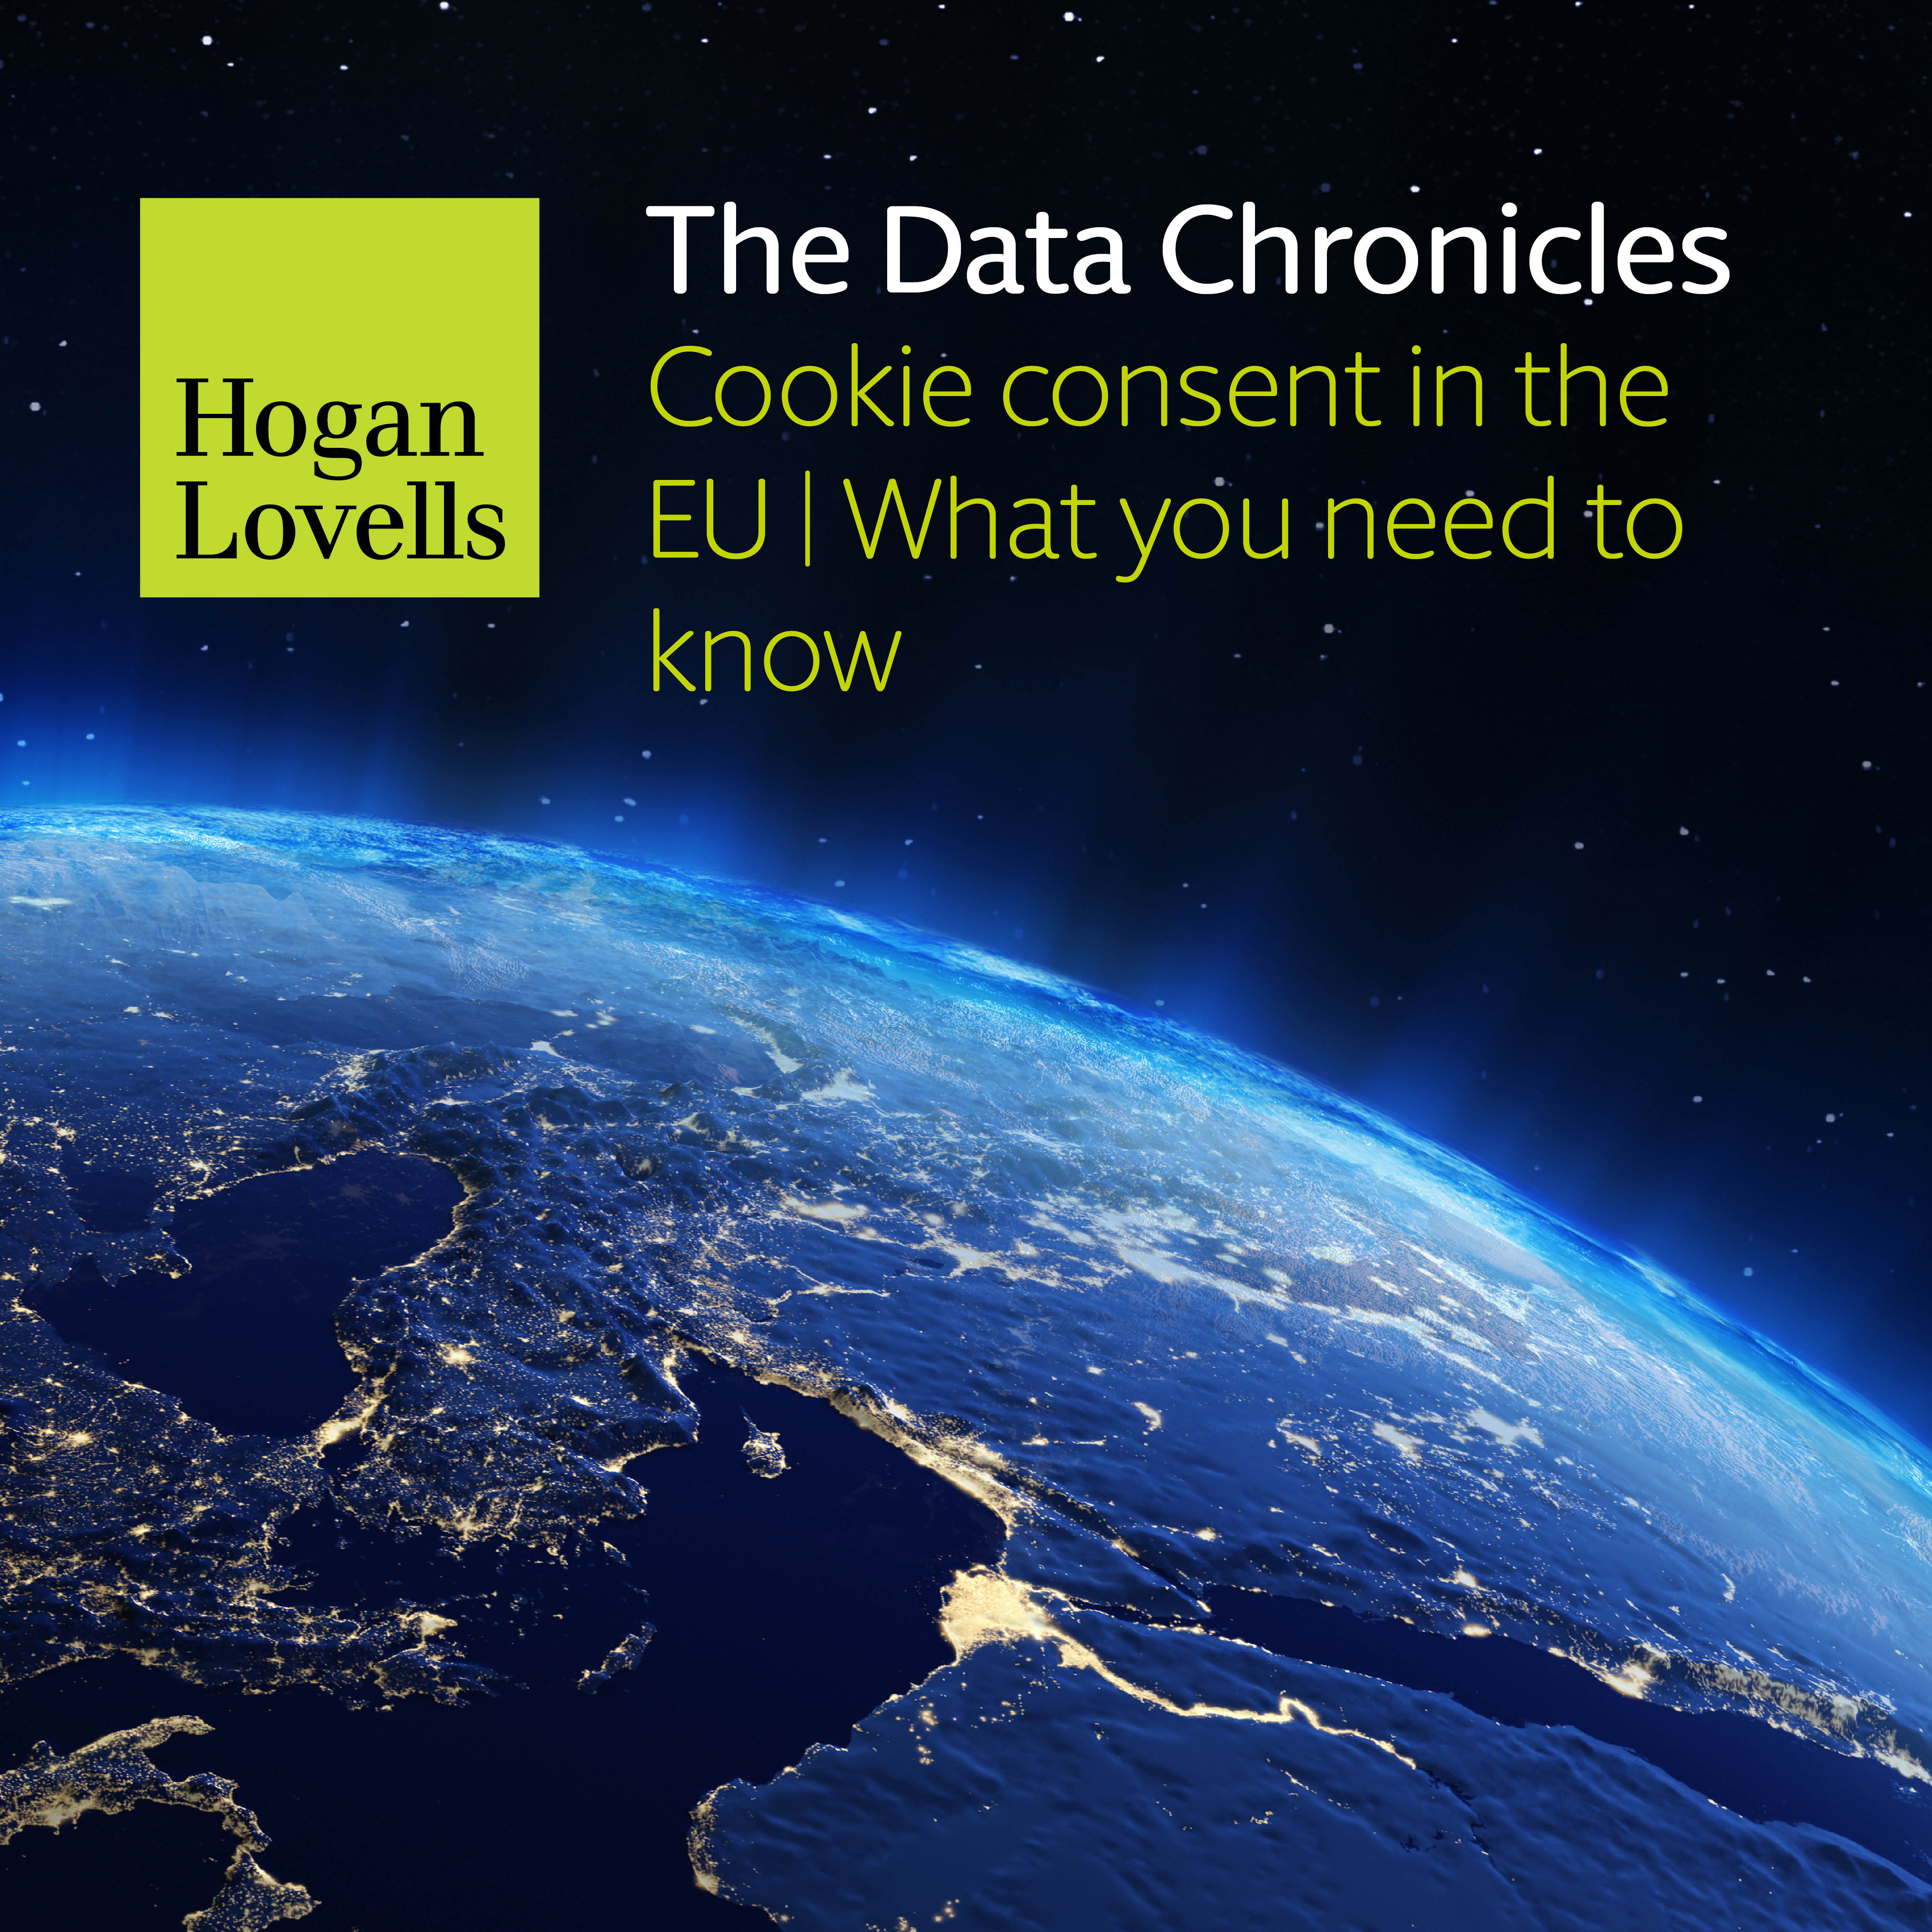 The Data Chronicles_Cookie consent in EU3